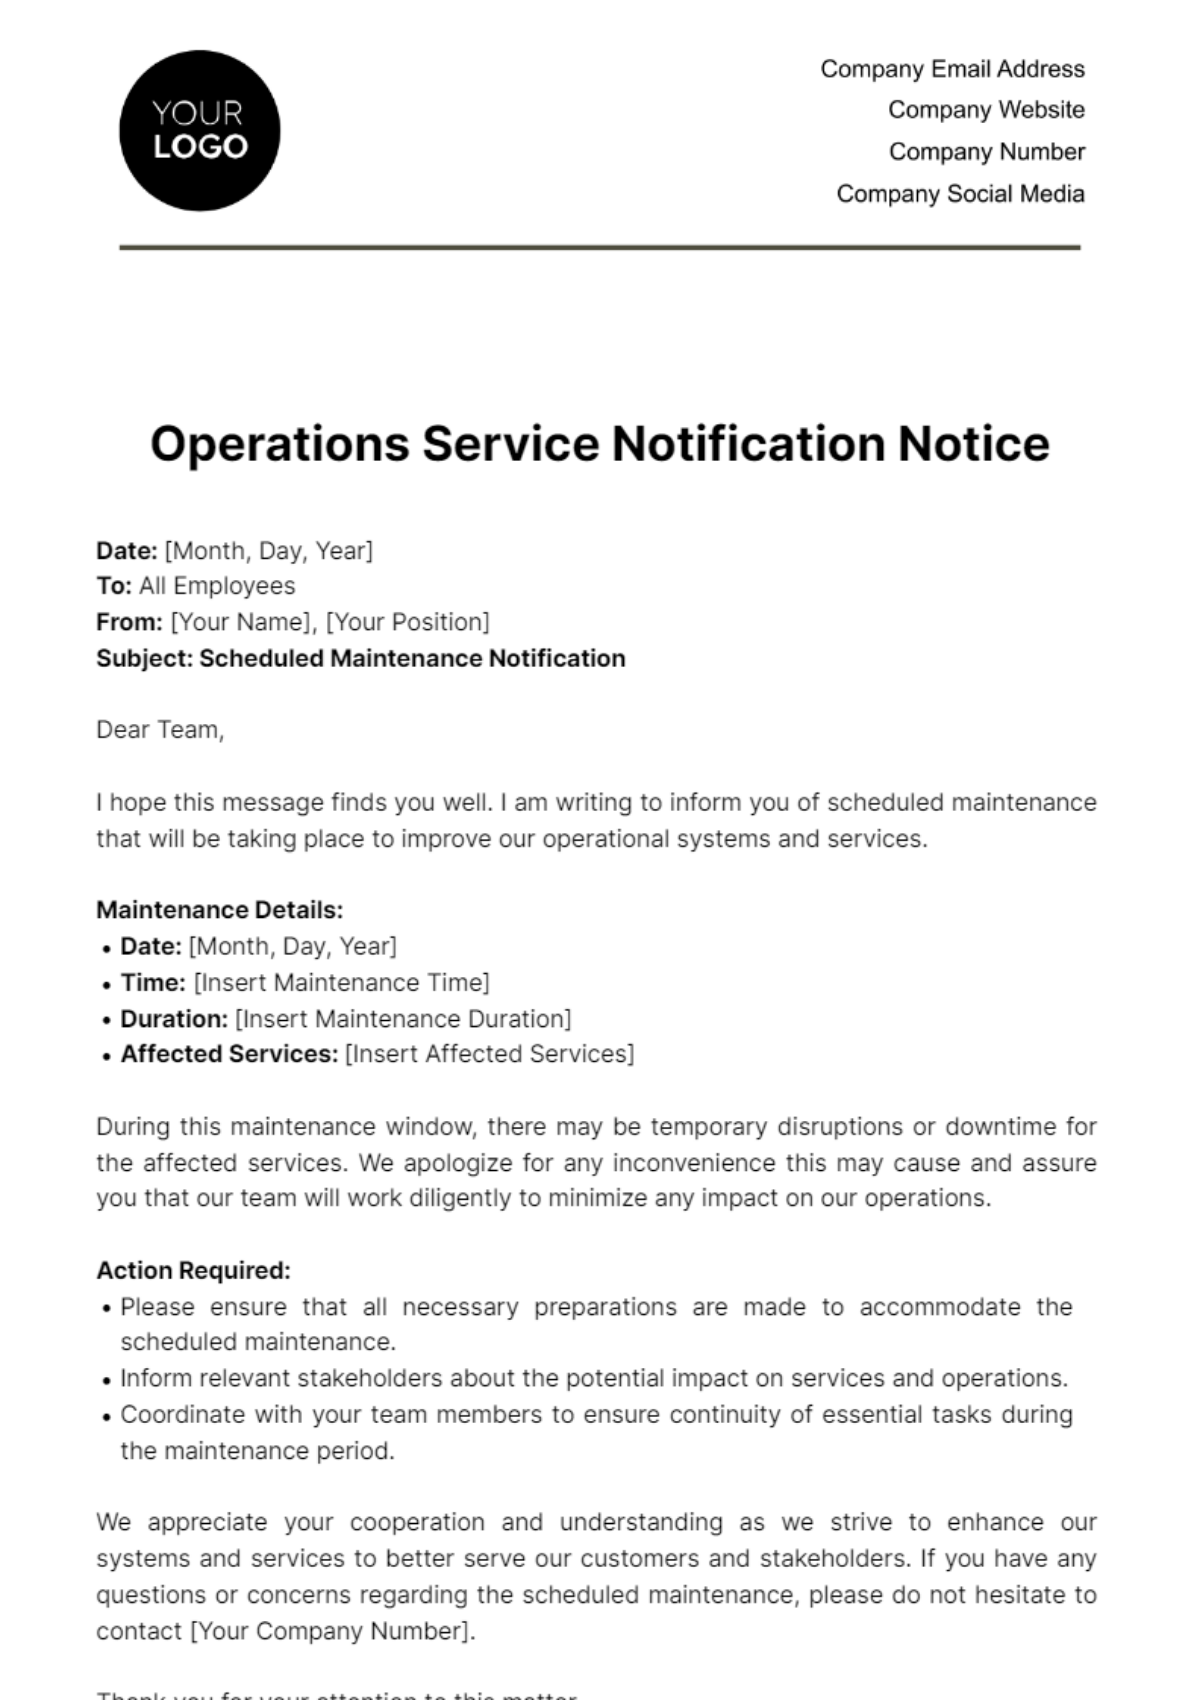 Operations Service Notification Notice Template